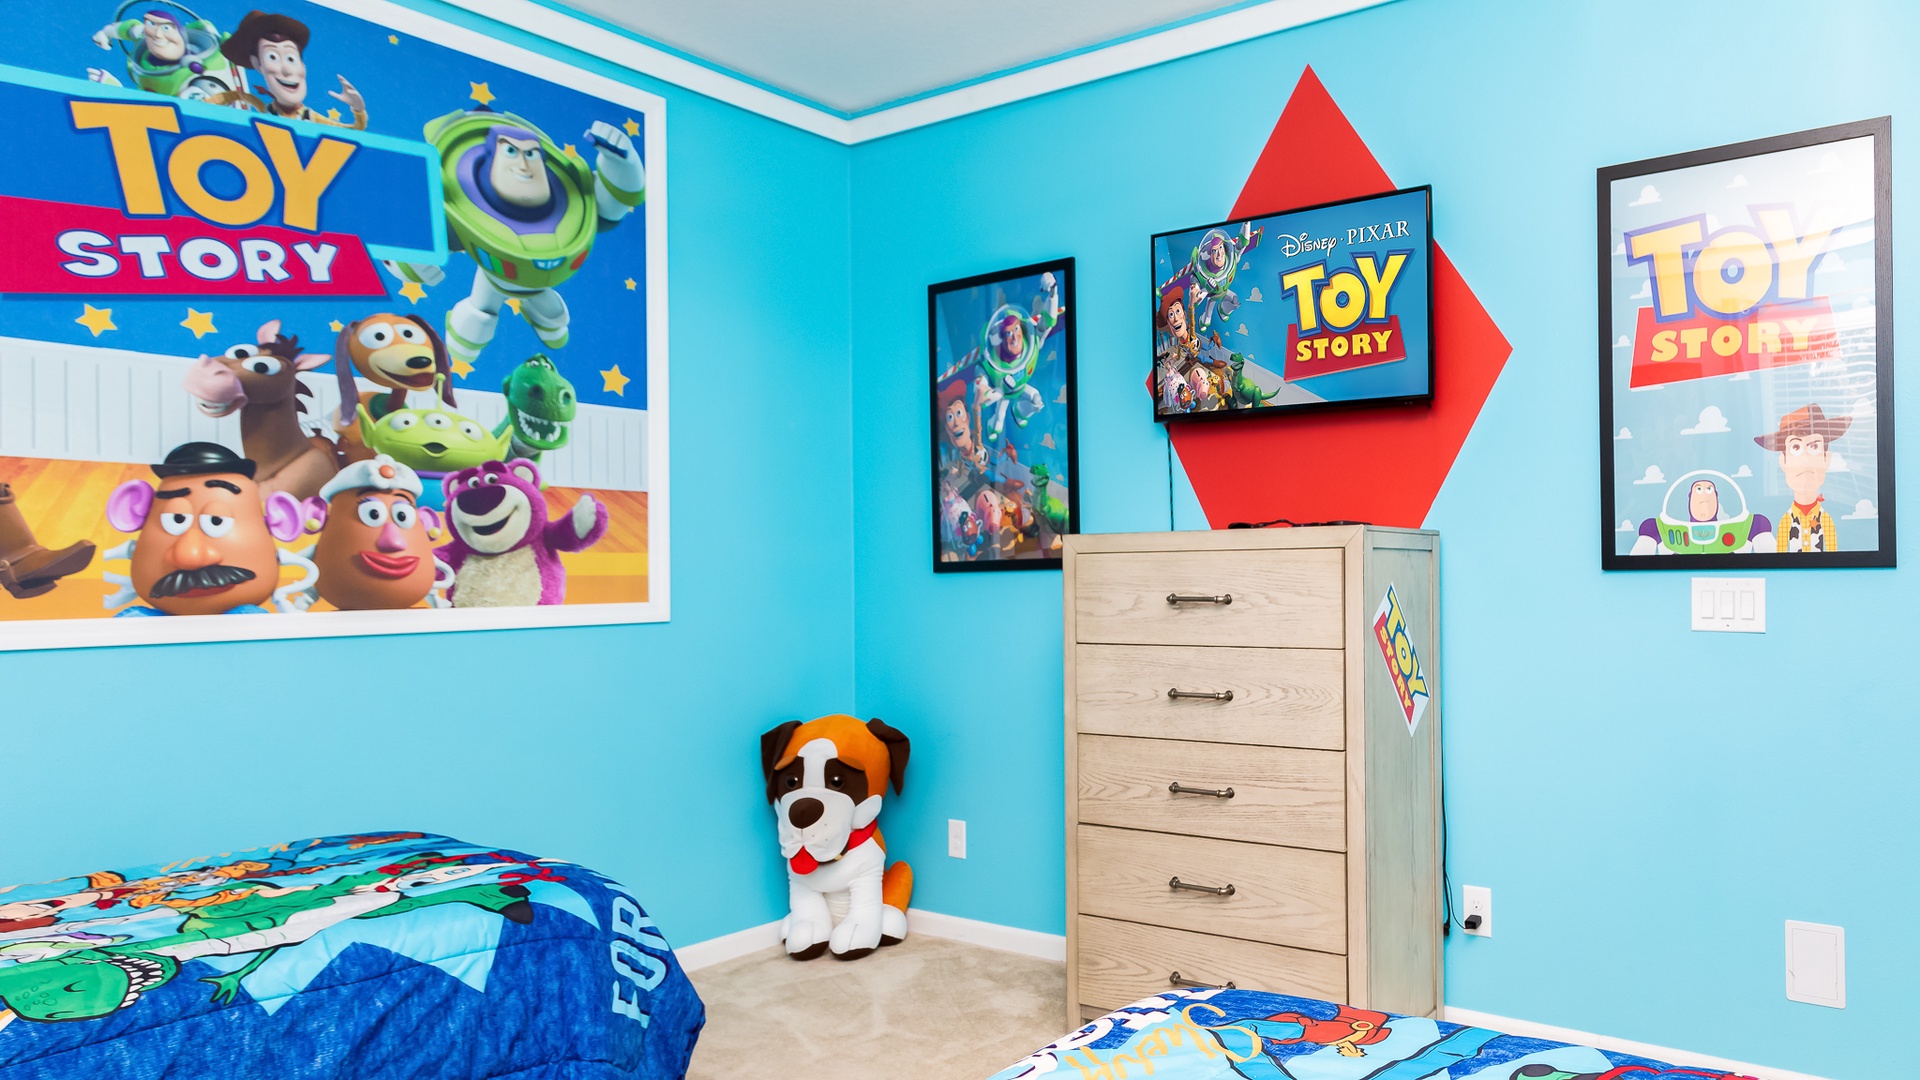 Bedroom #1 is Toy Story themed